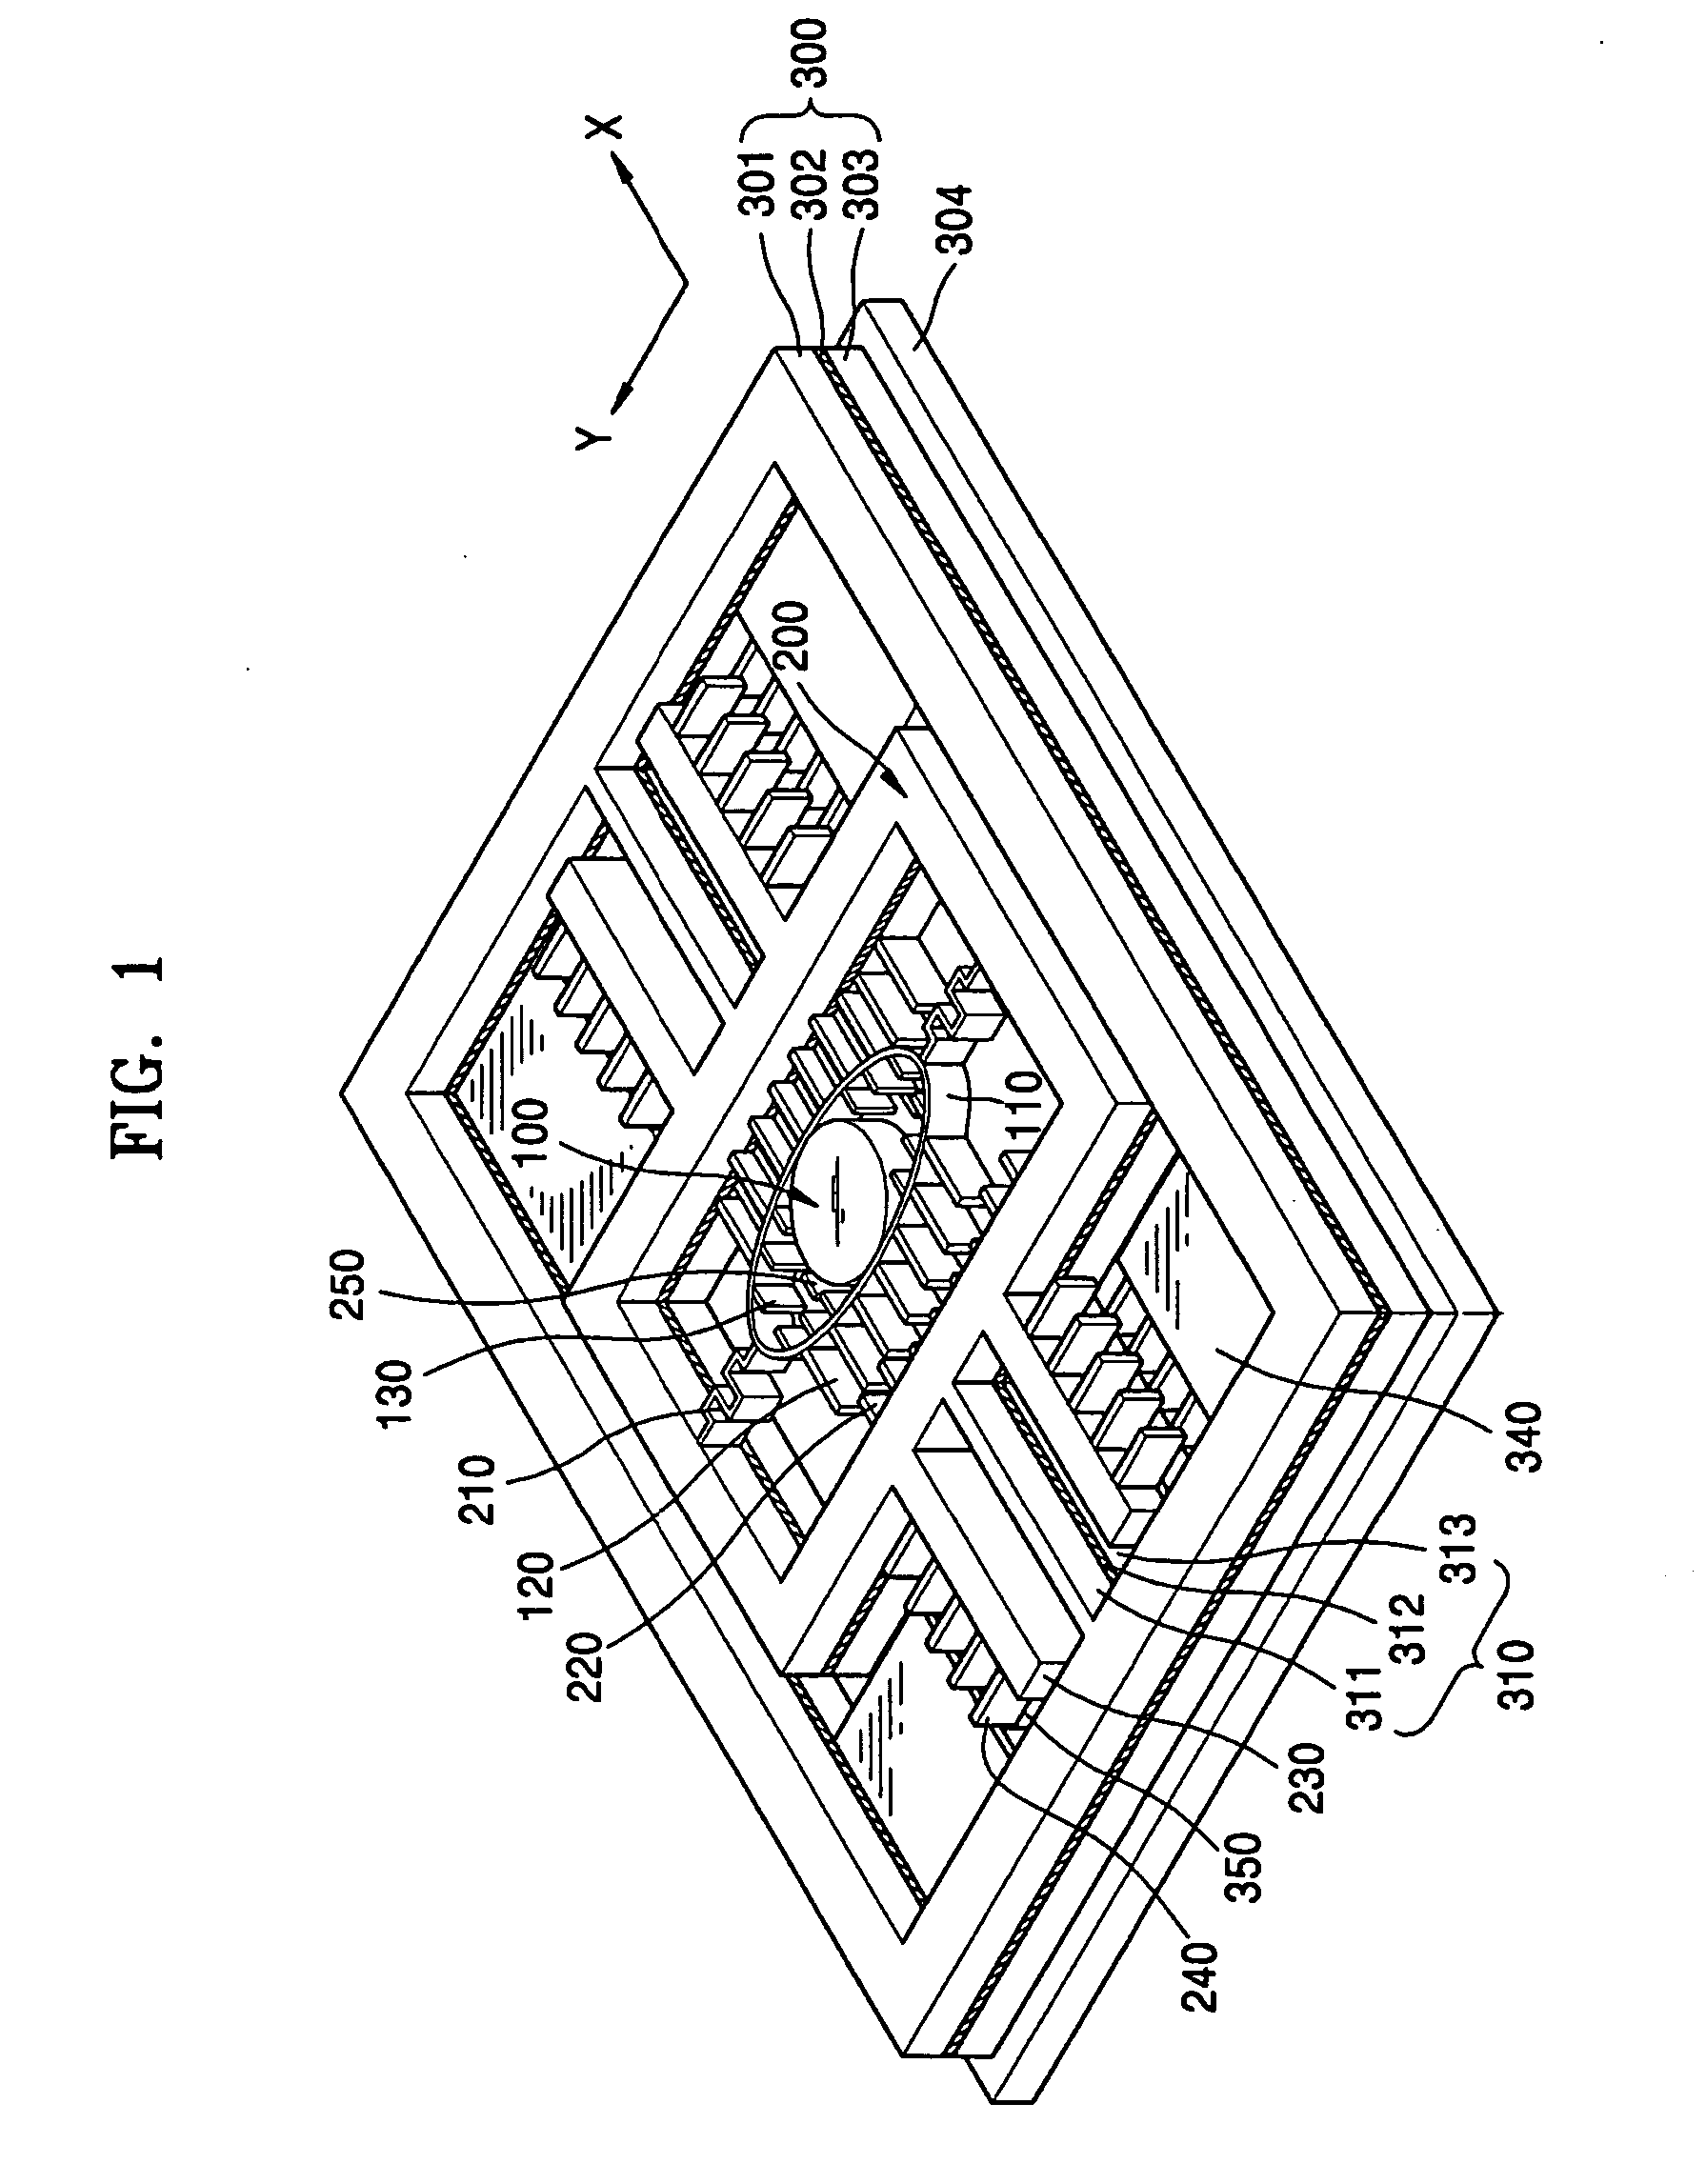 Biaxial actuator and method of manufacturing the same